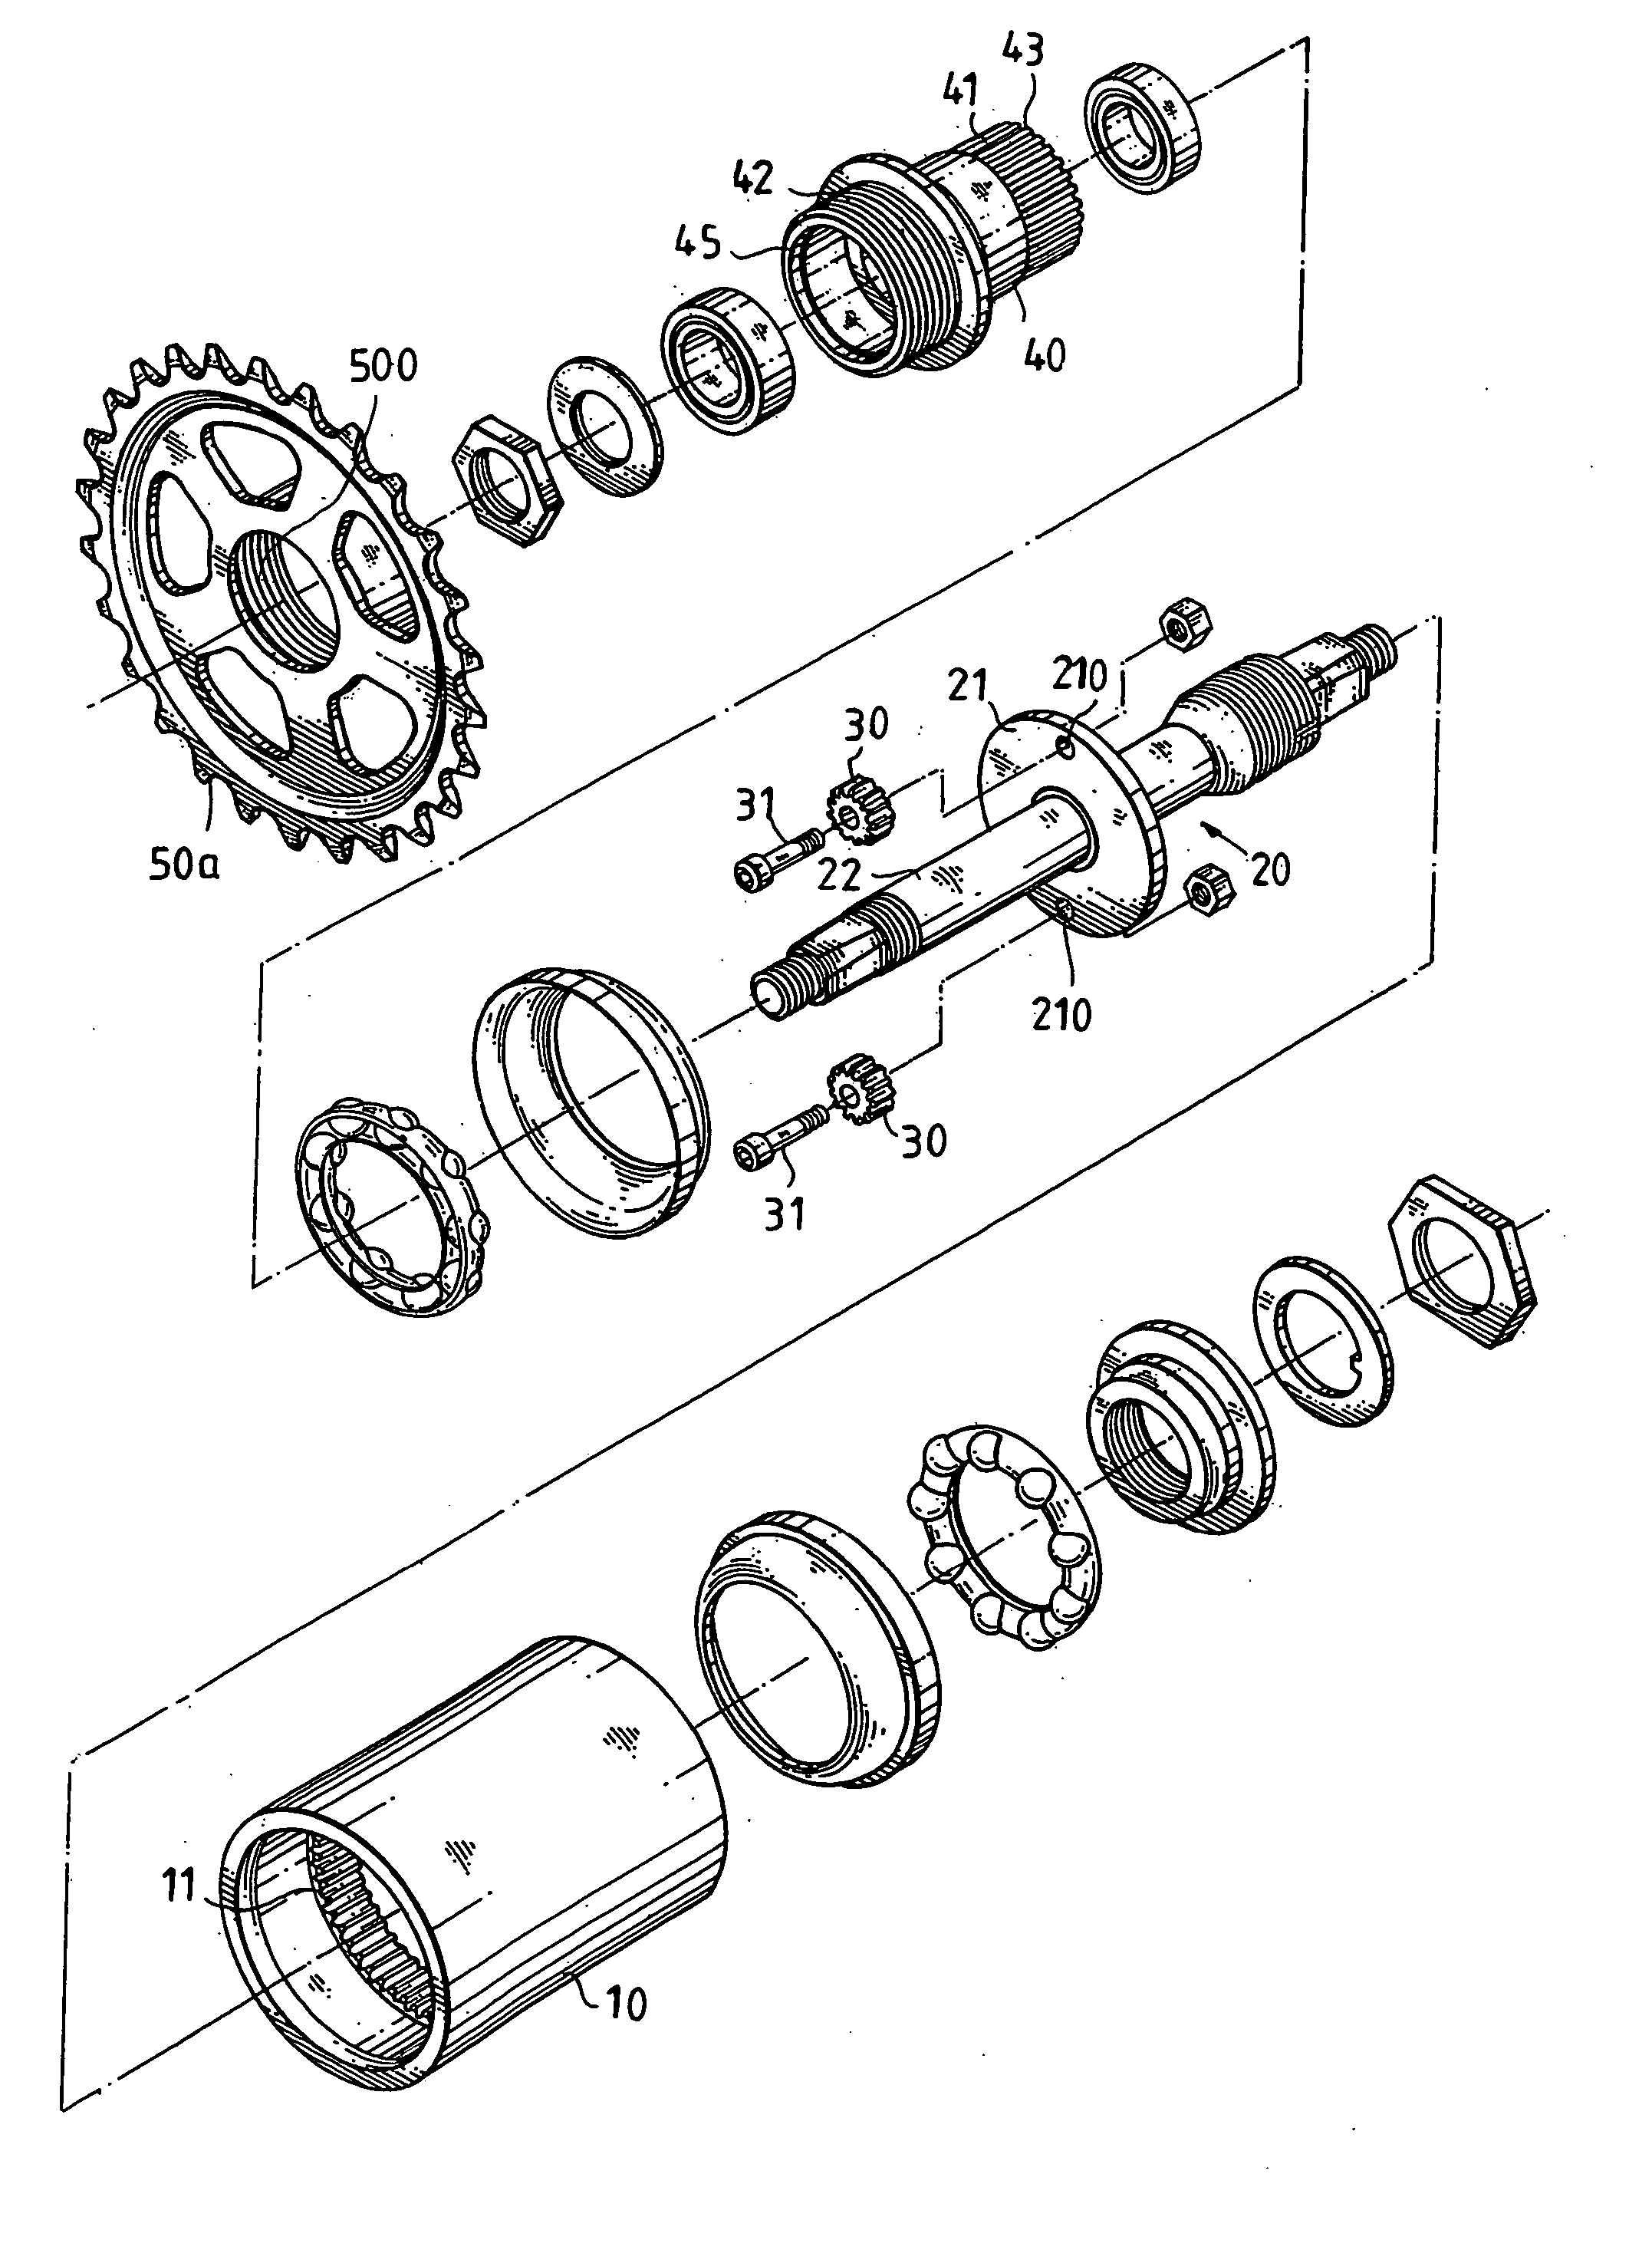 Crank axle drive structure for bicycle